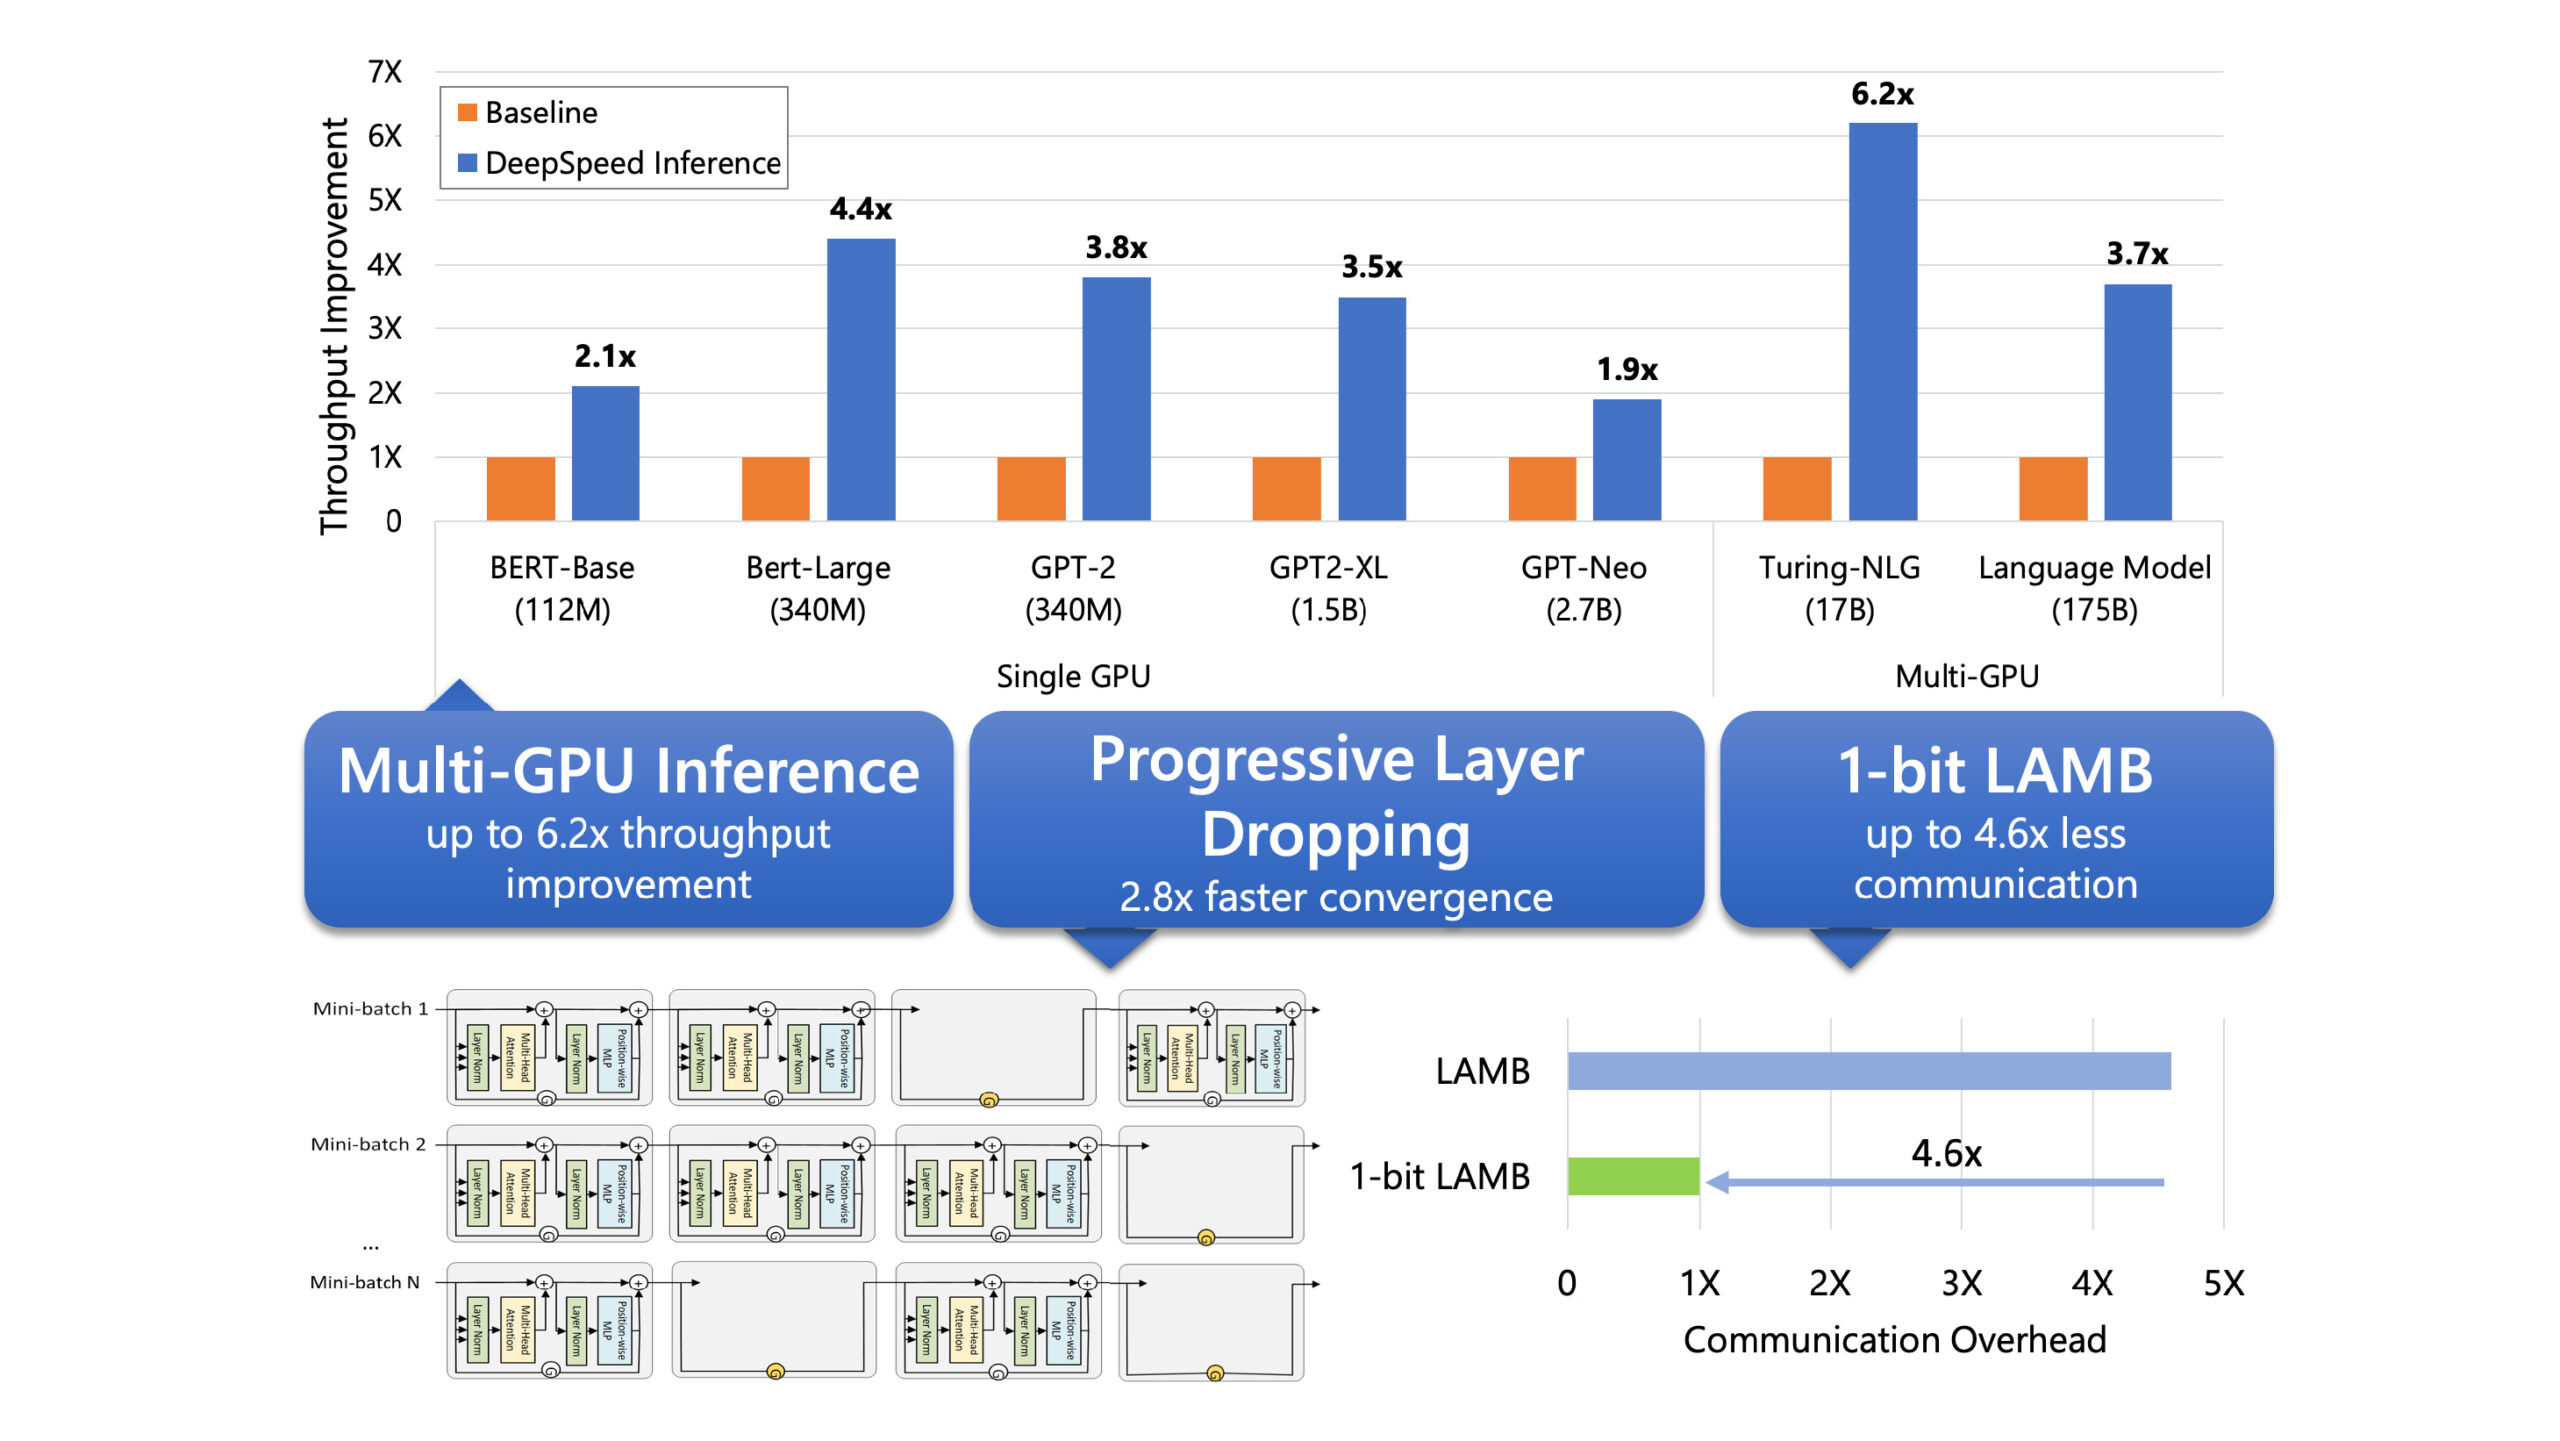 DeepSpeed multi GPU inference offers up to 6.9 times throughput improvement for large deep learning model inference. Progressive Layer Dropping offers 2.8 times faster convergence for large model training. 1-bit LAMB offers up to 4.6 times less communication overhead. Single GPU speedups for inference: 2.1 times on BERT Base, 4.4 times on BERT Large, 3.8 times on GPT 2, 3.5 times on GPT 2 XL, 1.9 times on GPT Neo. Multi GPU speedups for inference: 6.2 times for Turing NLG, 3.7 times for 175 billion parameter language model. 